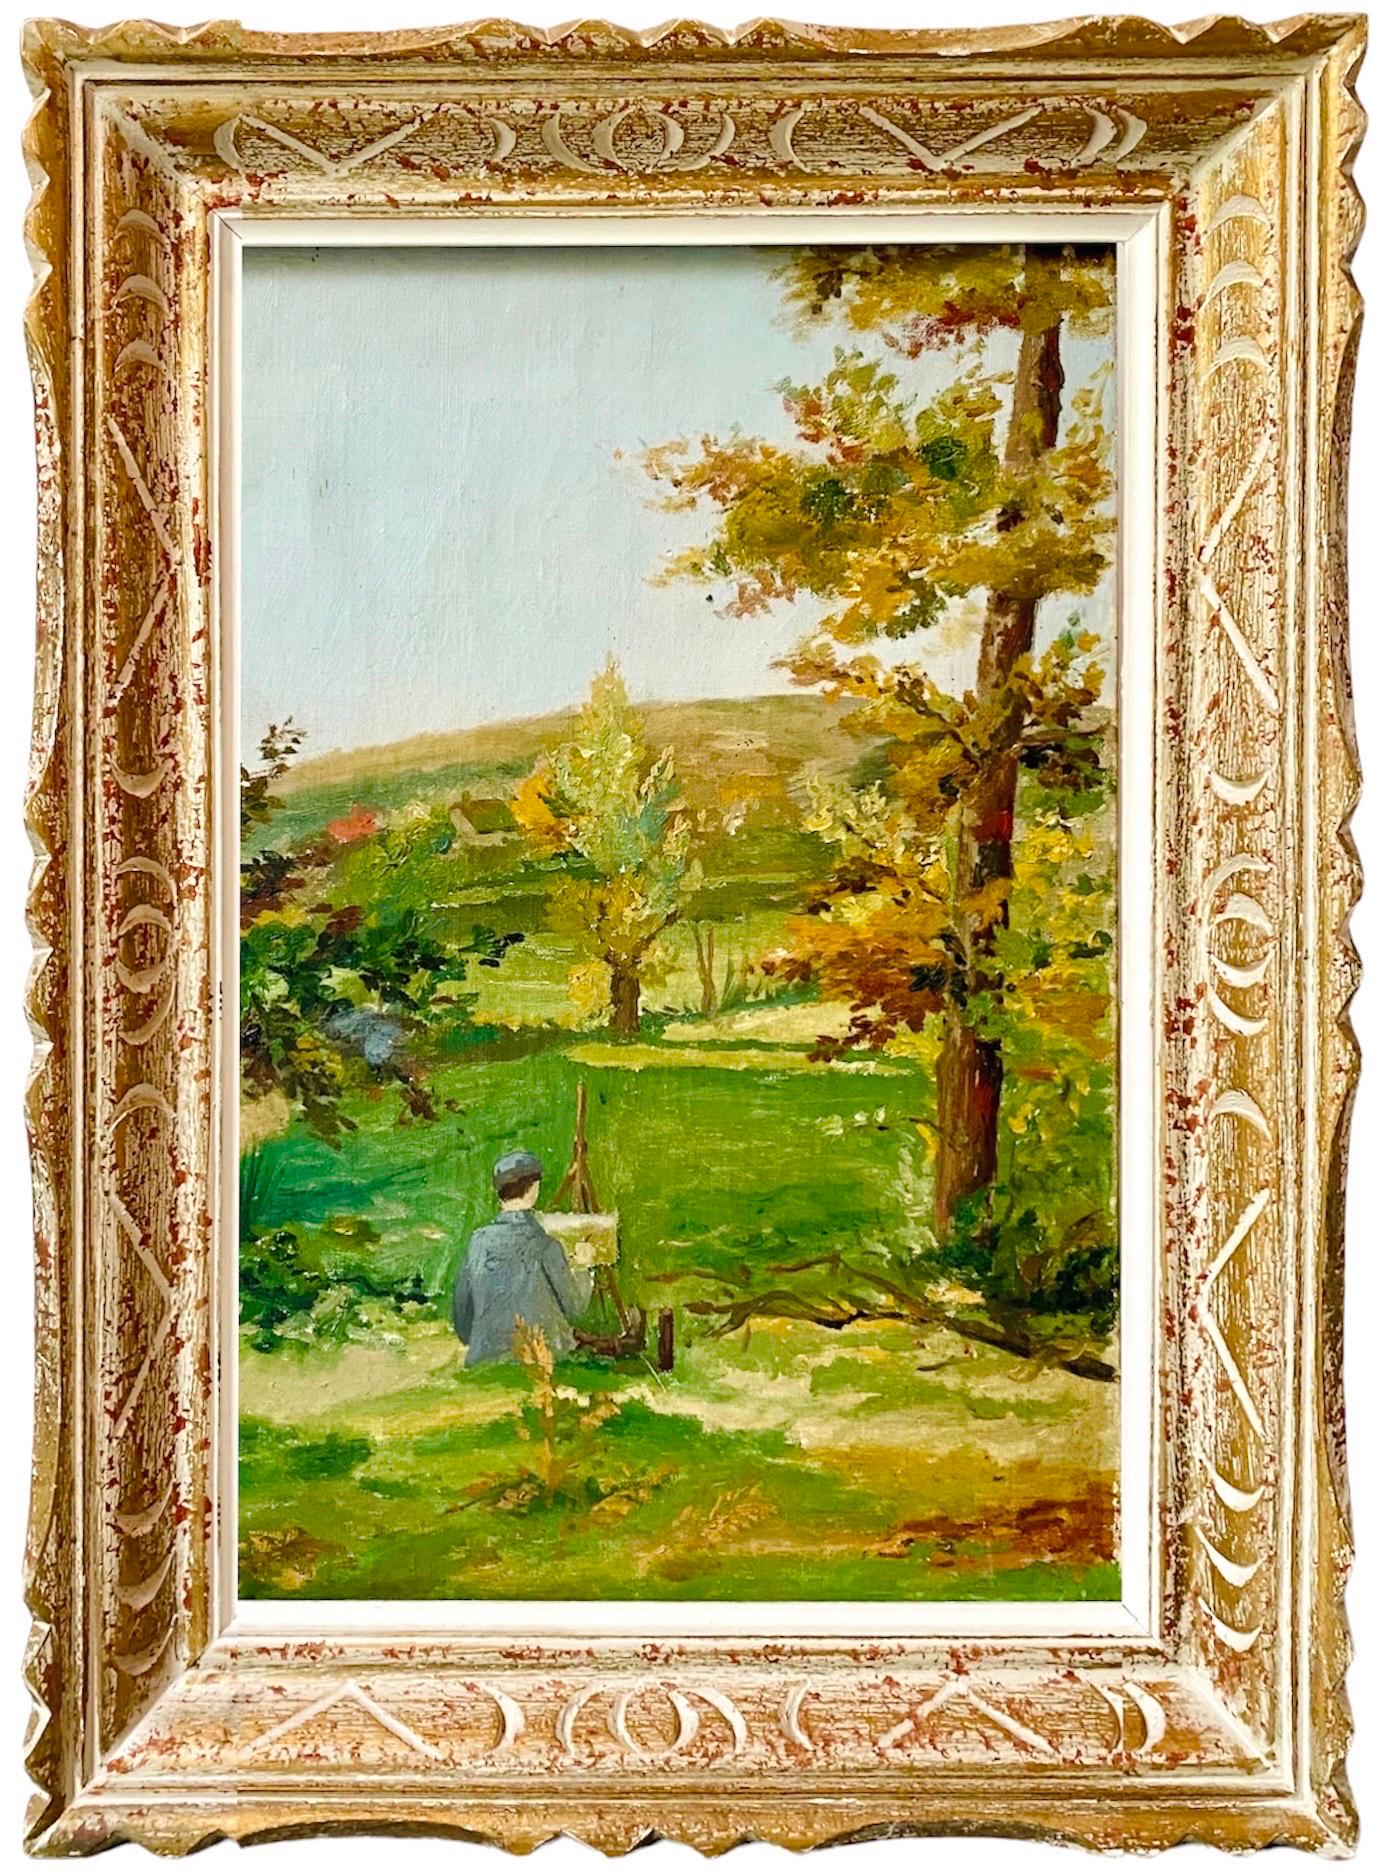 French impressionist painting - L'artiste - Countryside Self portrait ca. 1950